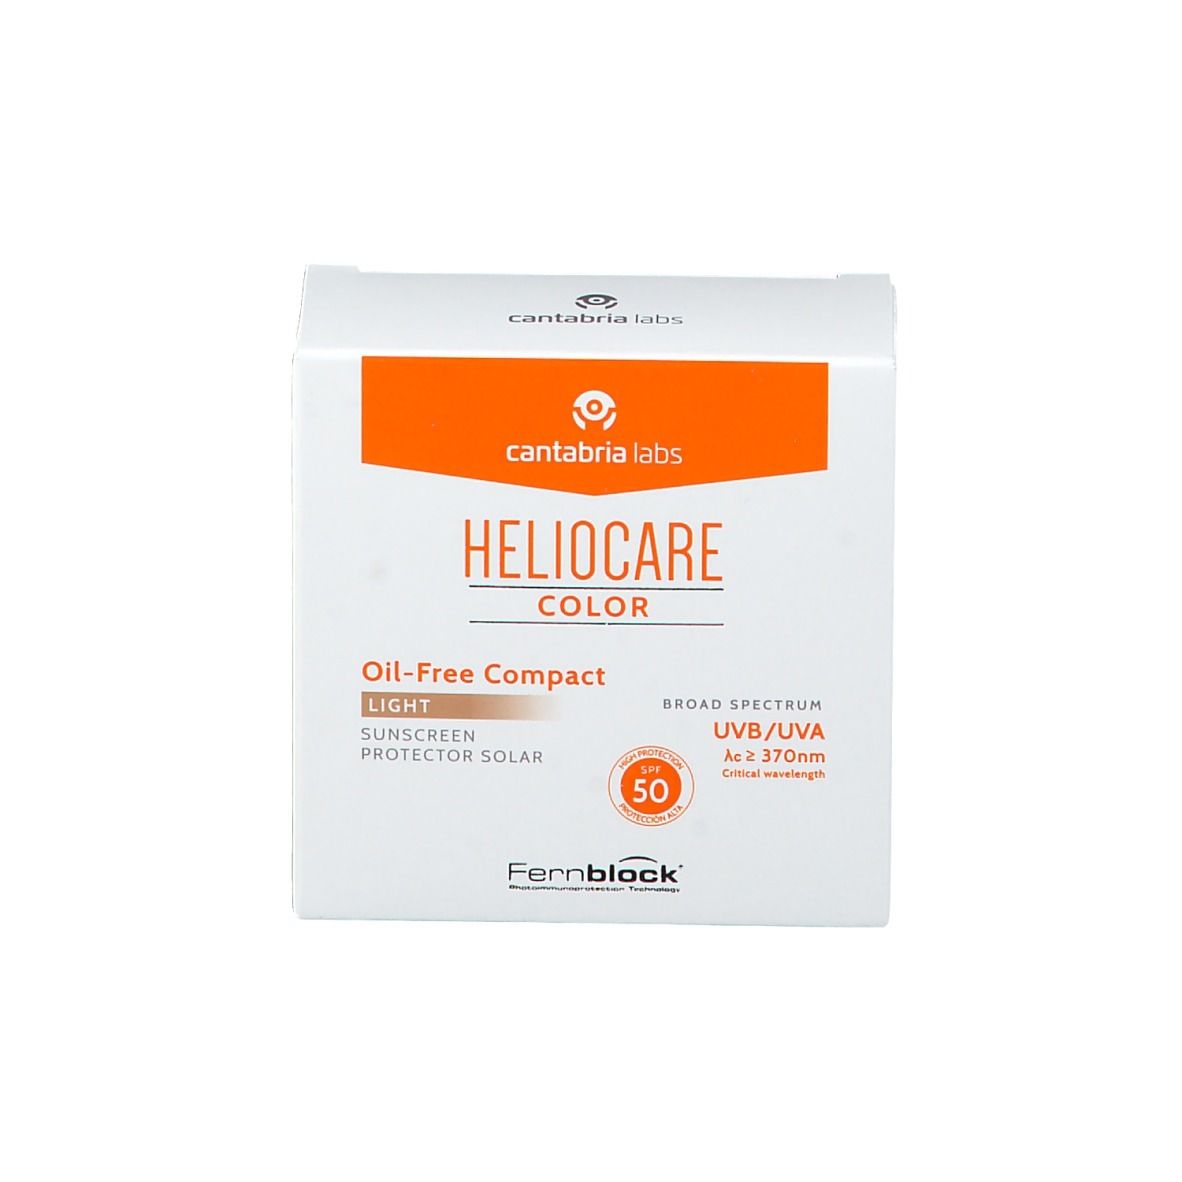 HELIOCARE® Compact Oil-Free Make-Up SPF 50 light